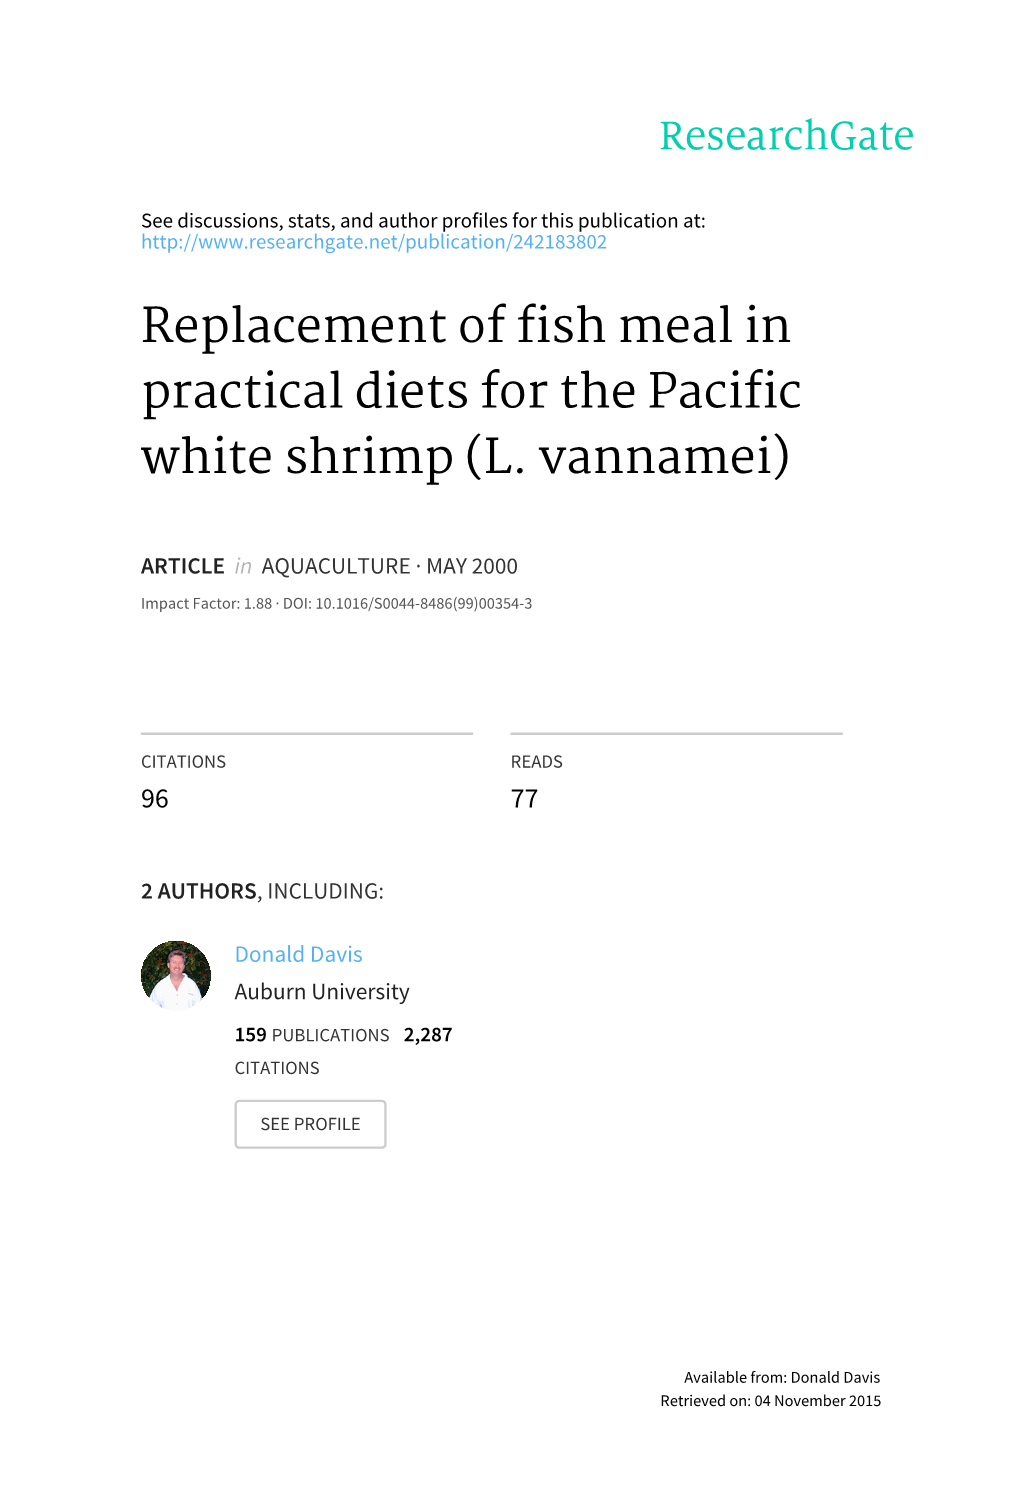 Replacement of Fish Meal in Practical Diets for the Pacific White Shrimp (L